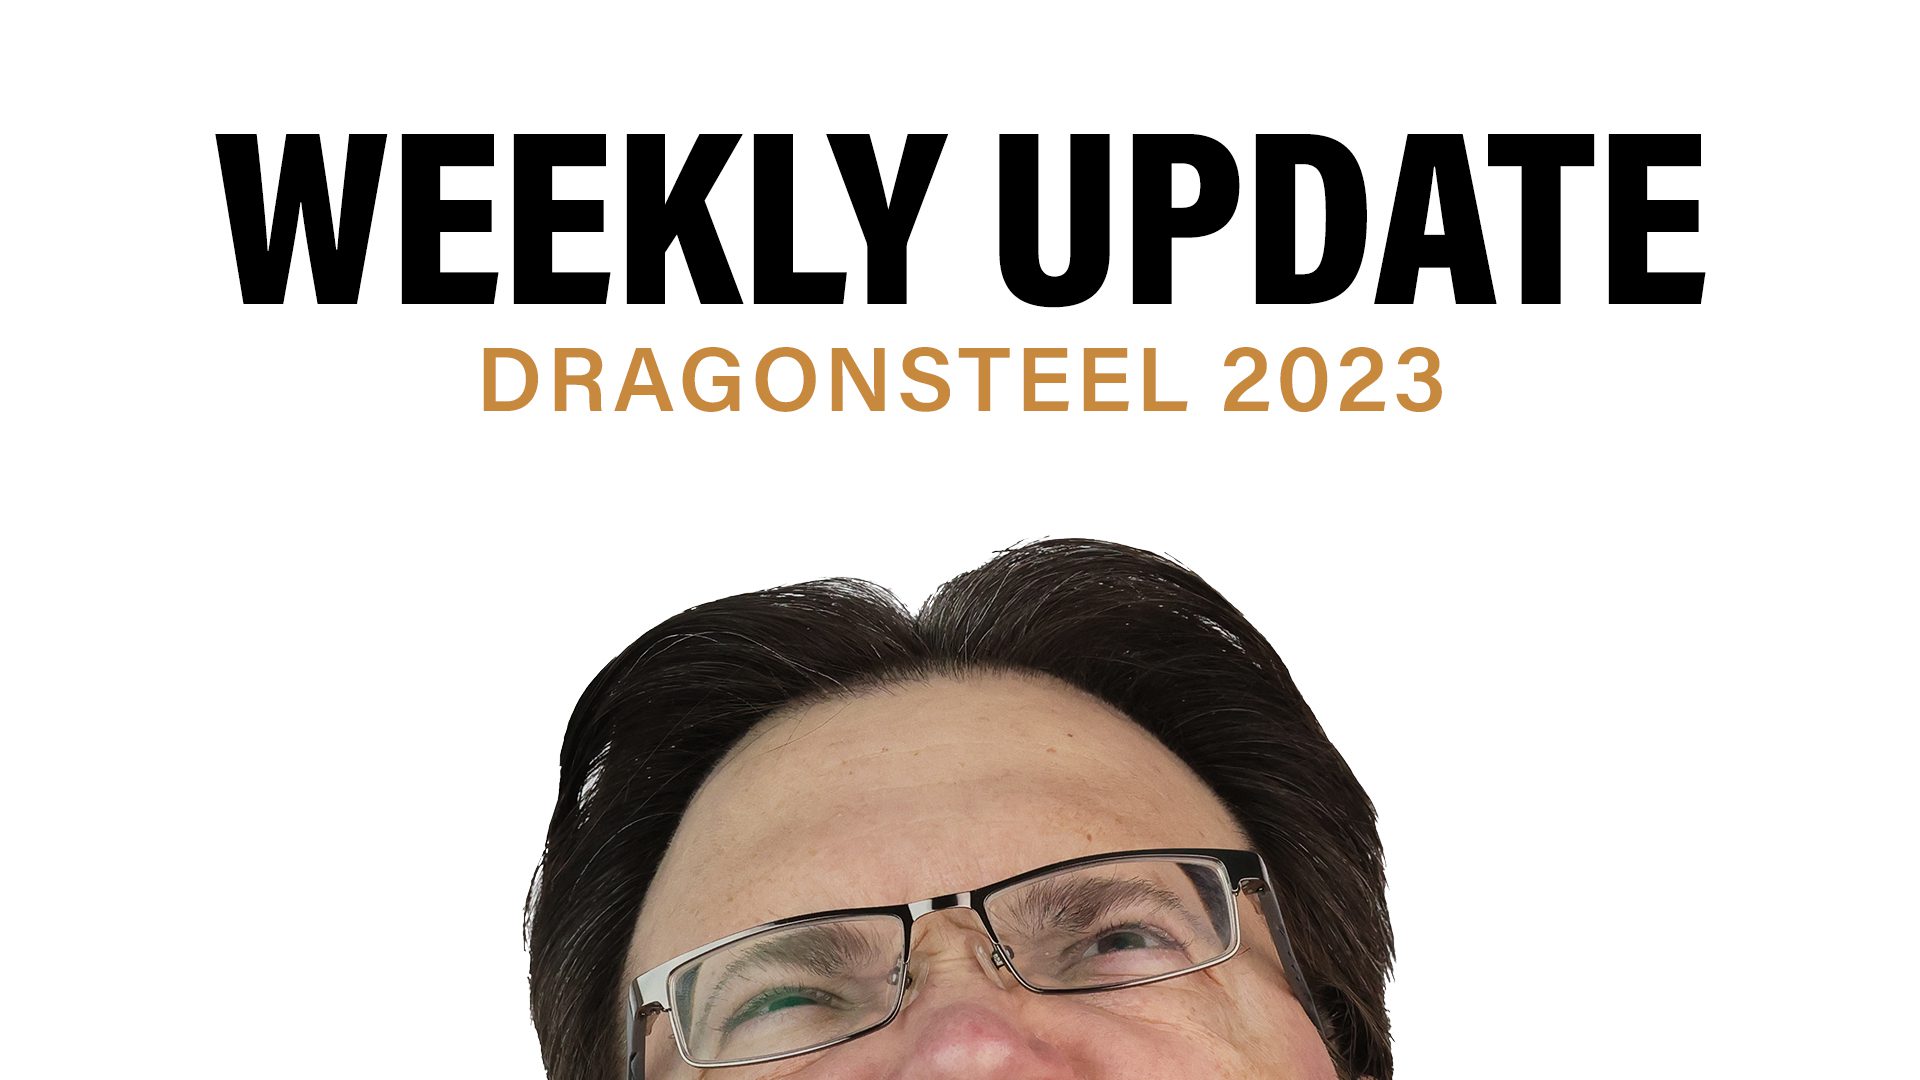 Brandon squints in a photo looking up at the Weekly Update title, "Dragonsteel 2023"